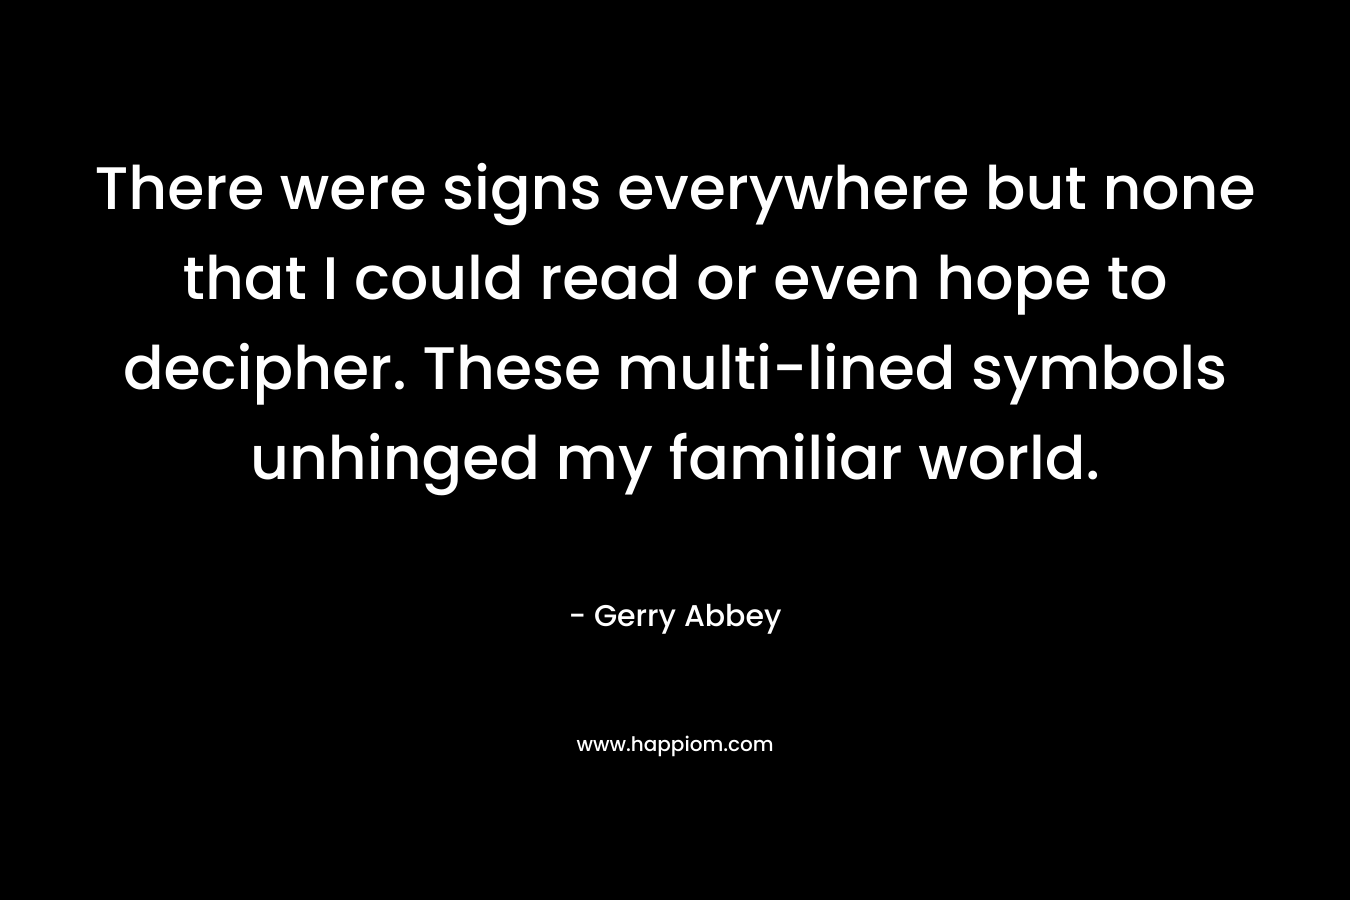 There were signs everywhere but none that I could read or even hope to decipher. These multi-lined symbols unhinged my familiar world. – Gerry Abbey